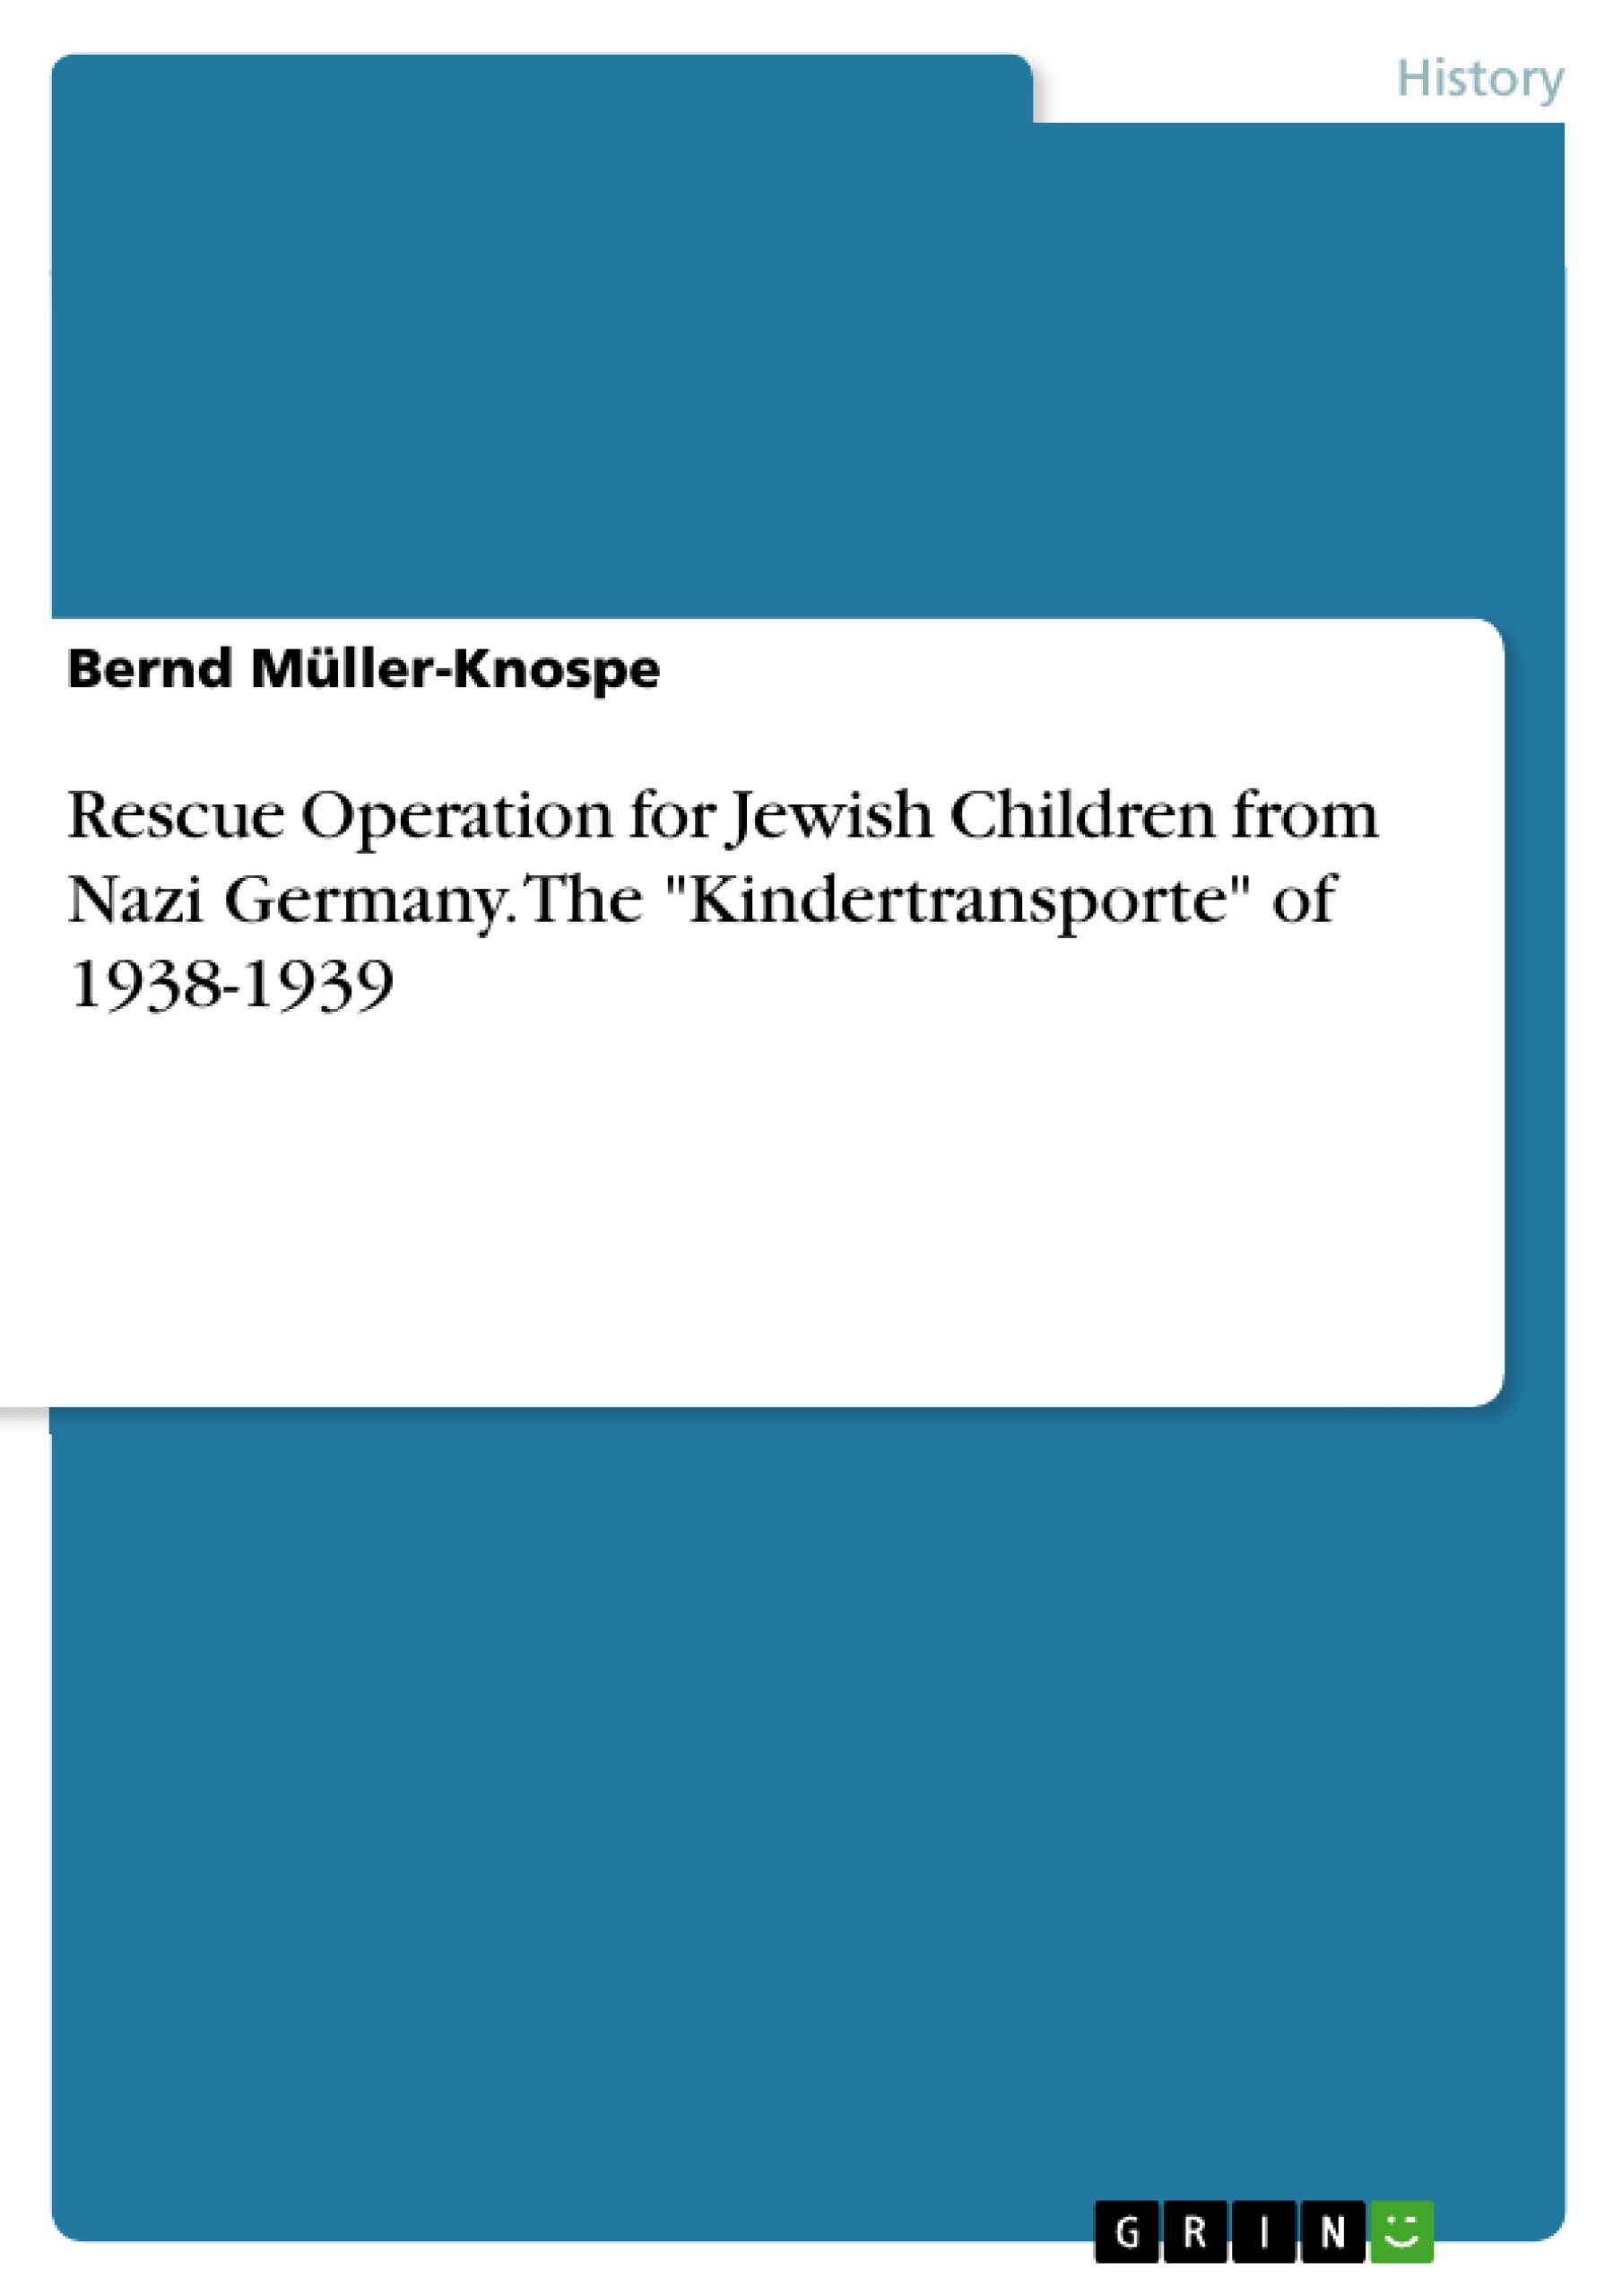 Título: Rescue Operation for Jewish Children from Nazi Germany. The "Kindertransporte" of 1938-1939